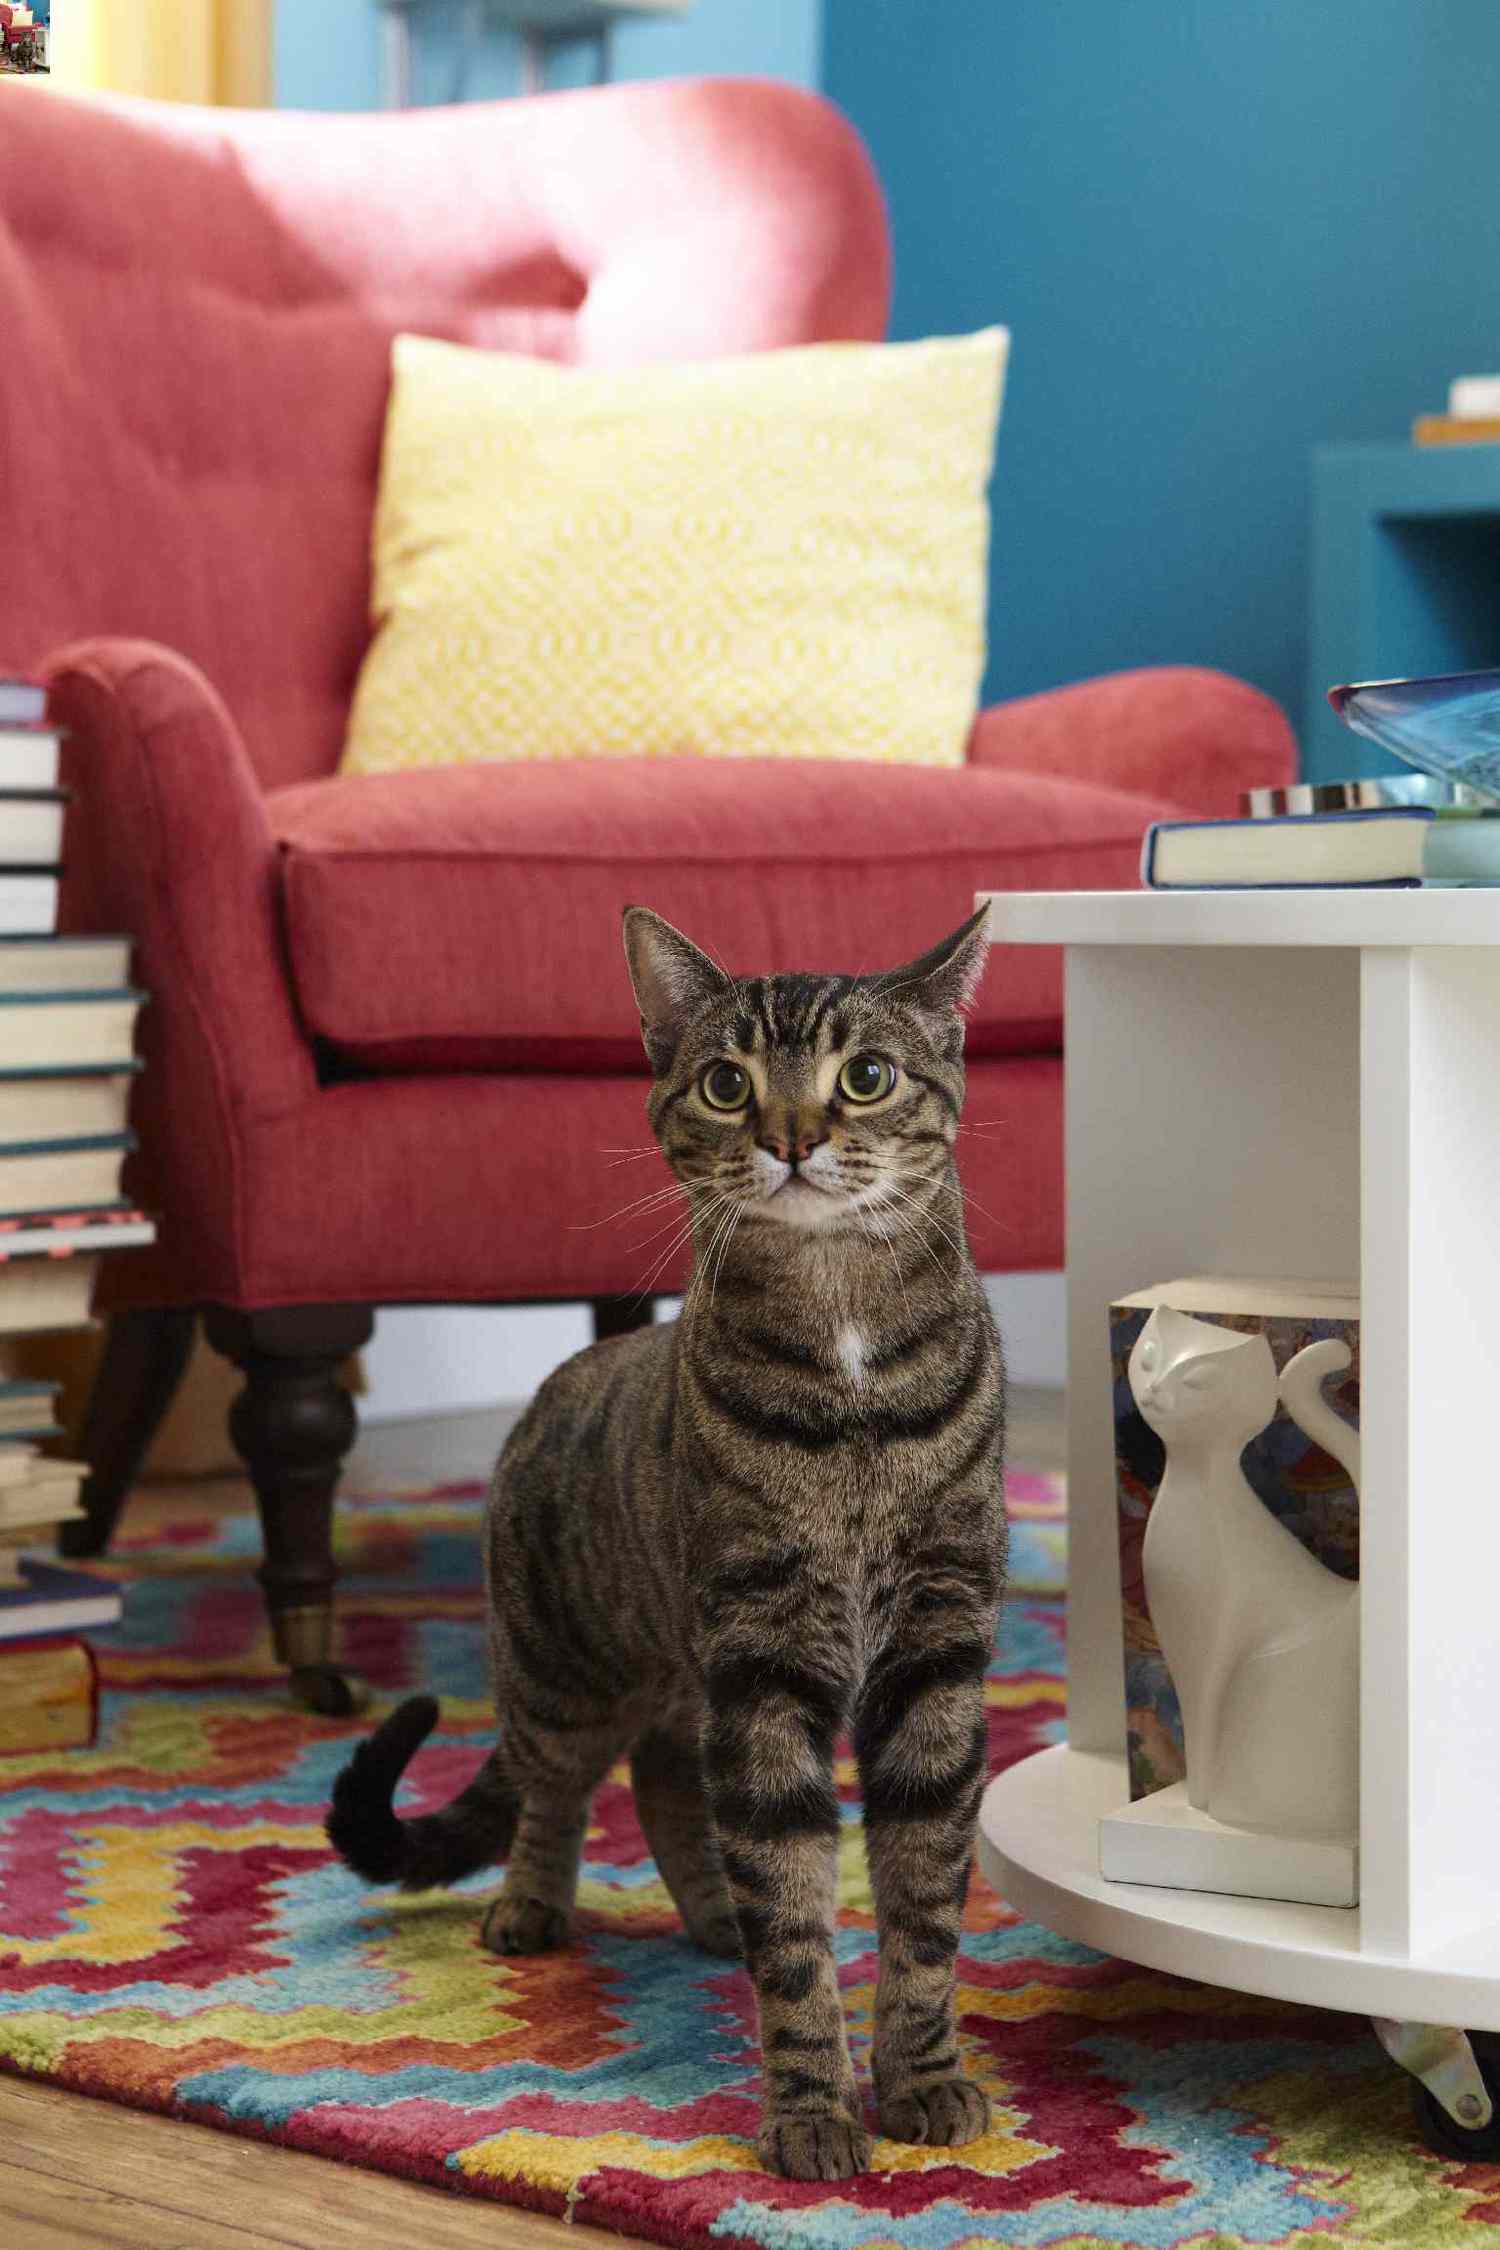 Cat sitting on colorful rug in living room.